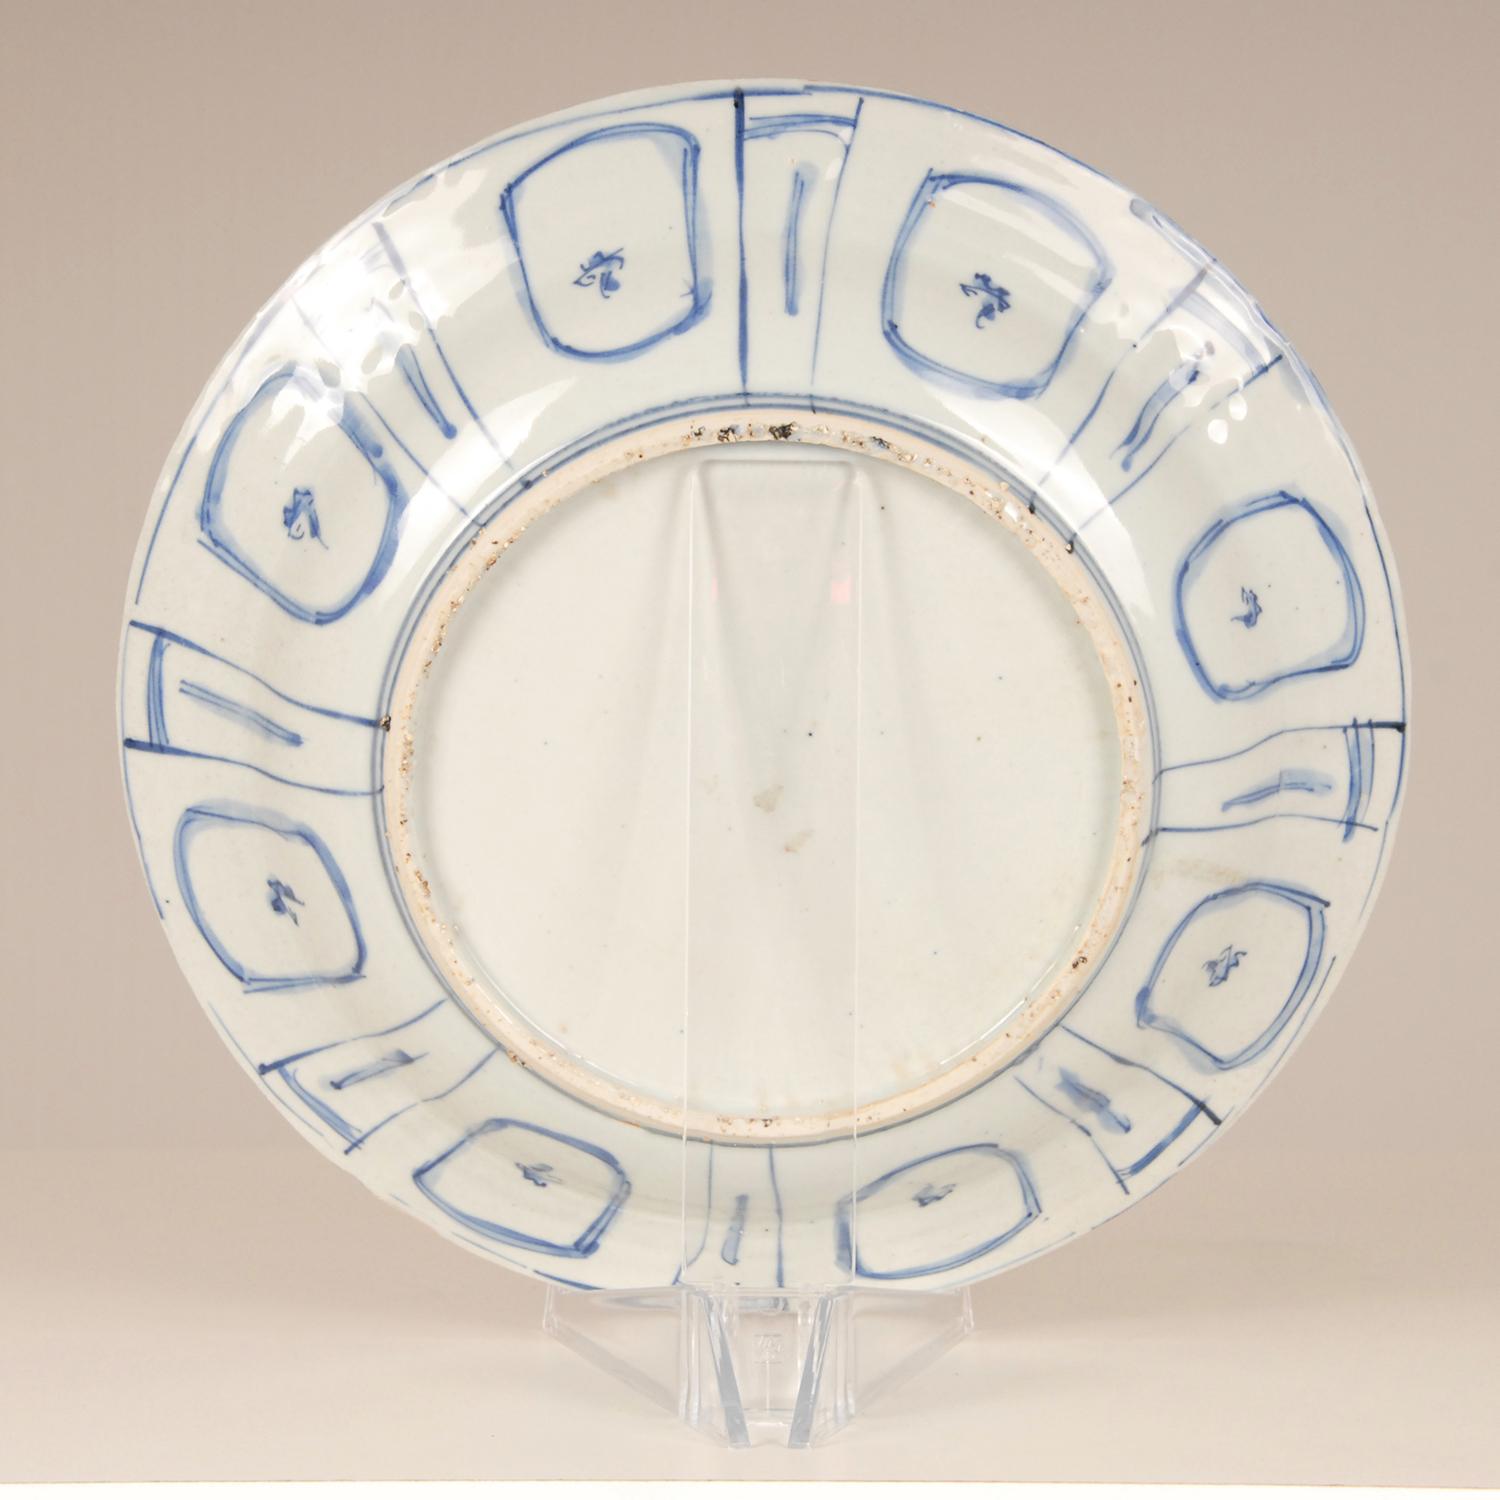 Ceramic Chinese Ming Porcelain Early 17th Century Blue White Plate Charger Kraak Dish For Sale